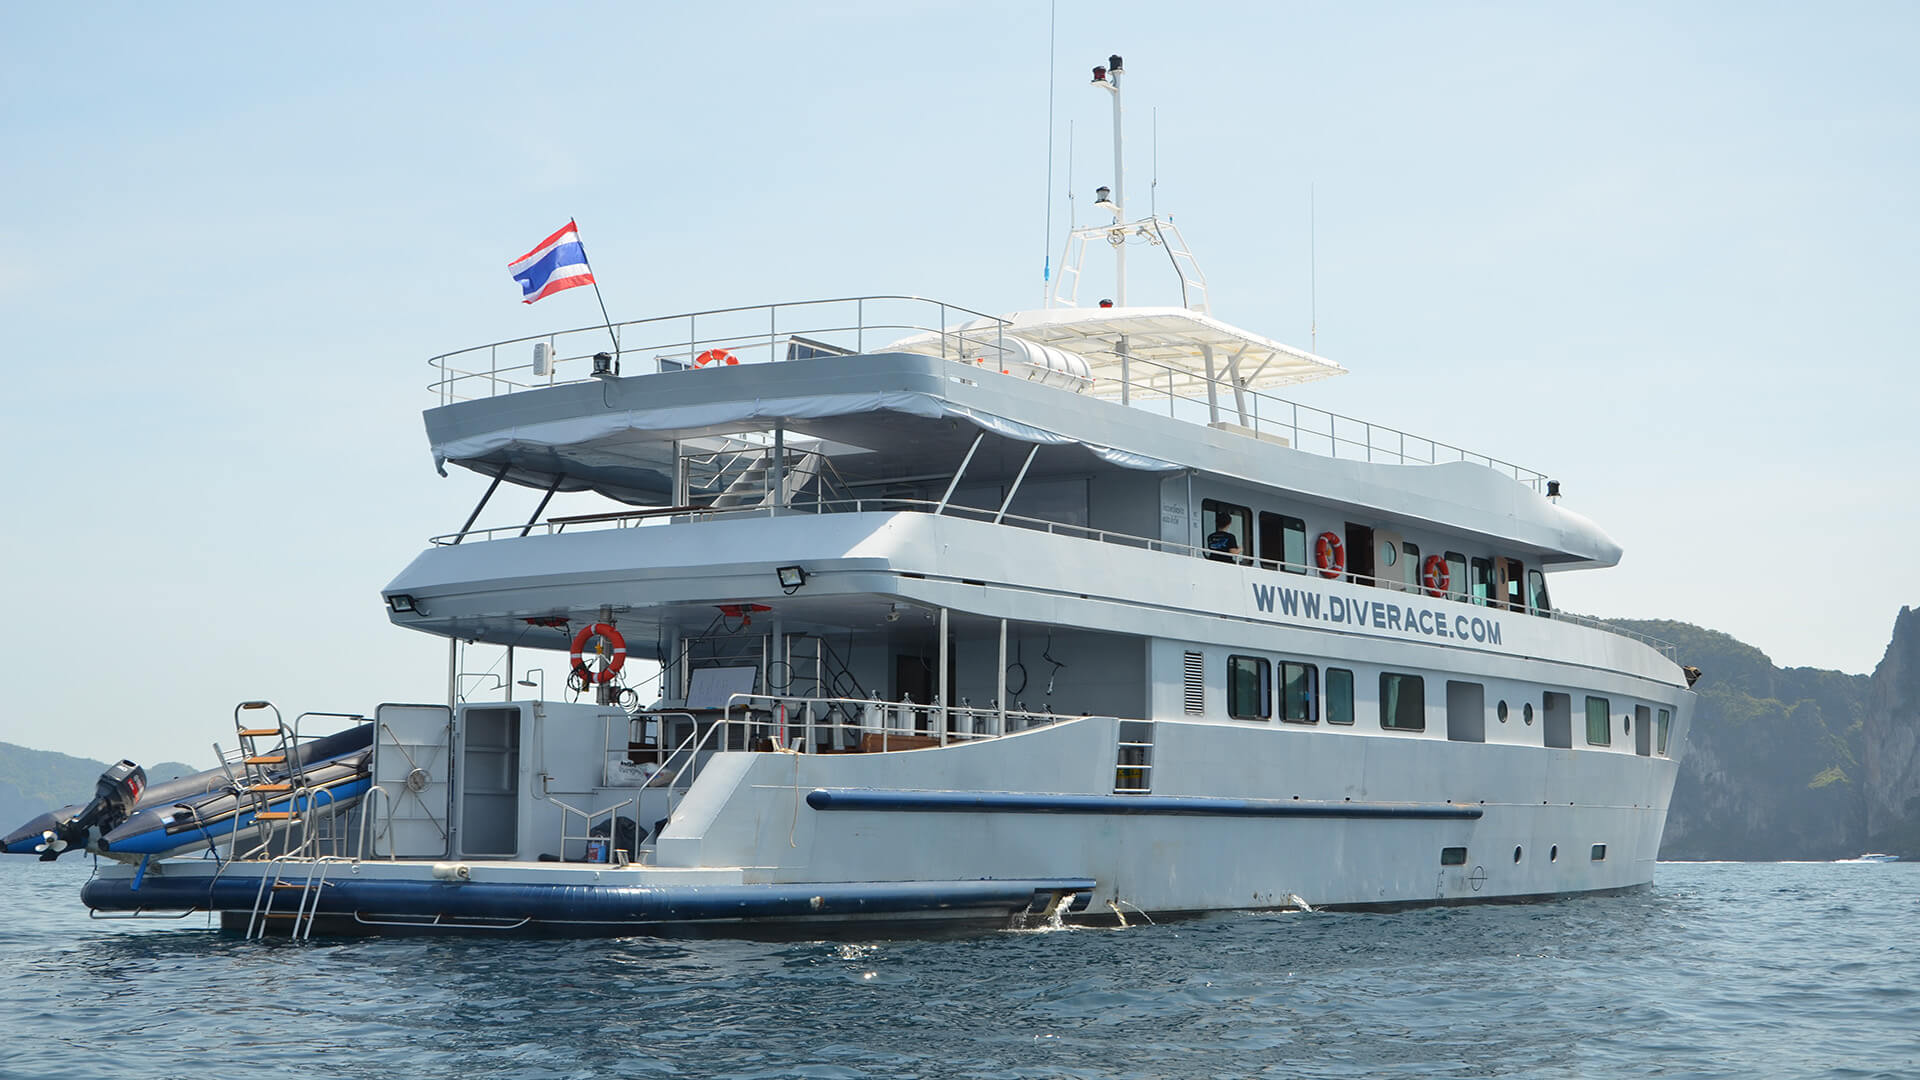 Hin Daeng and Hin Muang In Style With MV Dive Race Class E